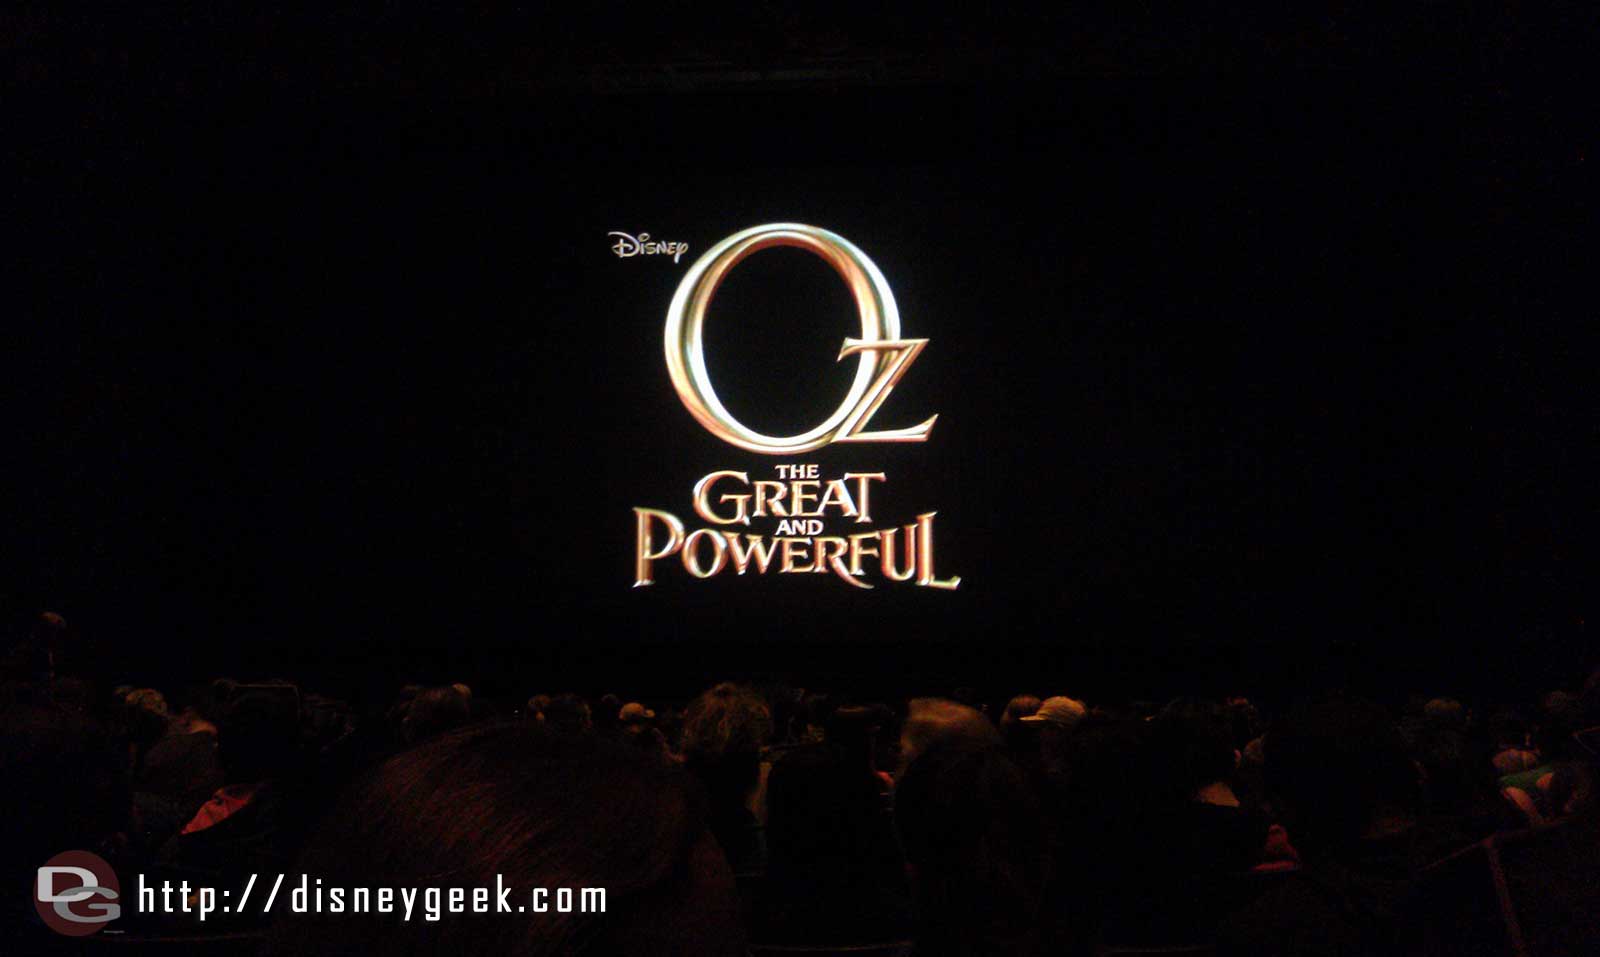 Ready for the Annual Passholder preview of Oz the Great and Powerful in the Muppet Theater